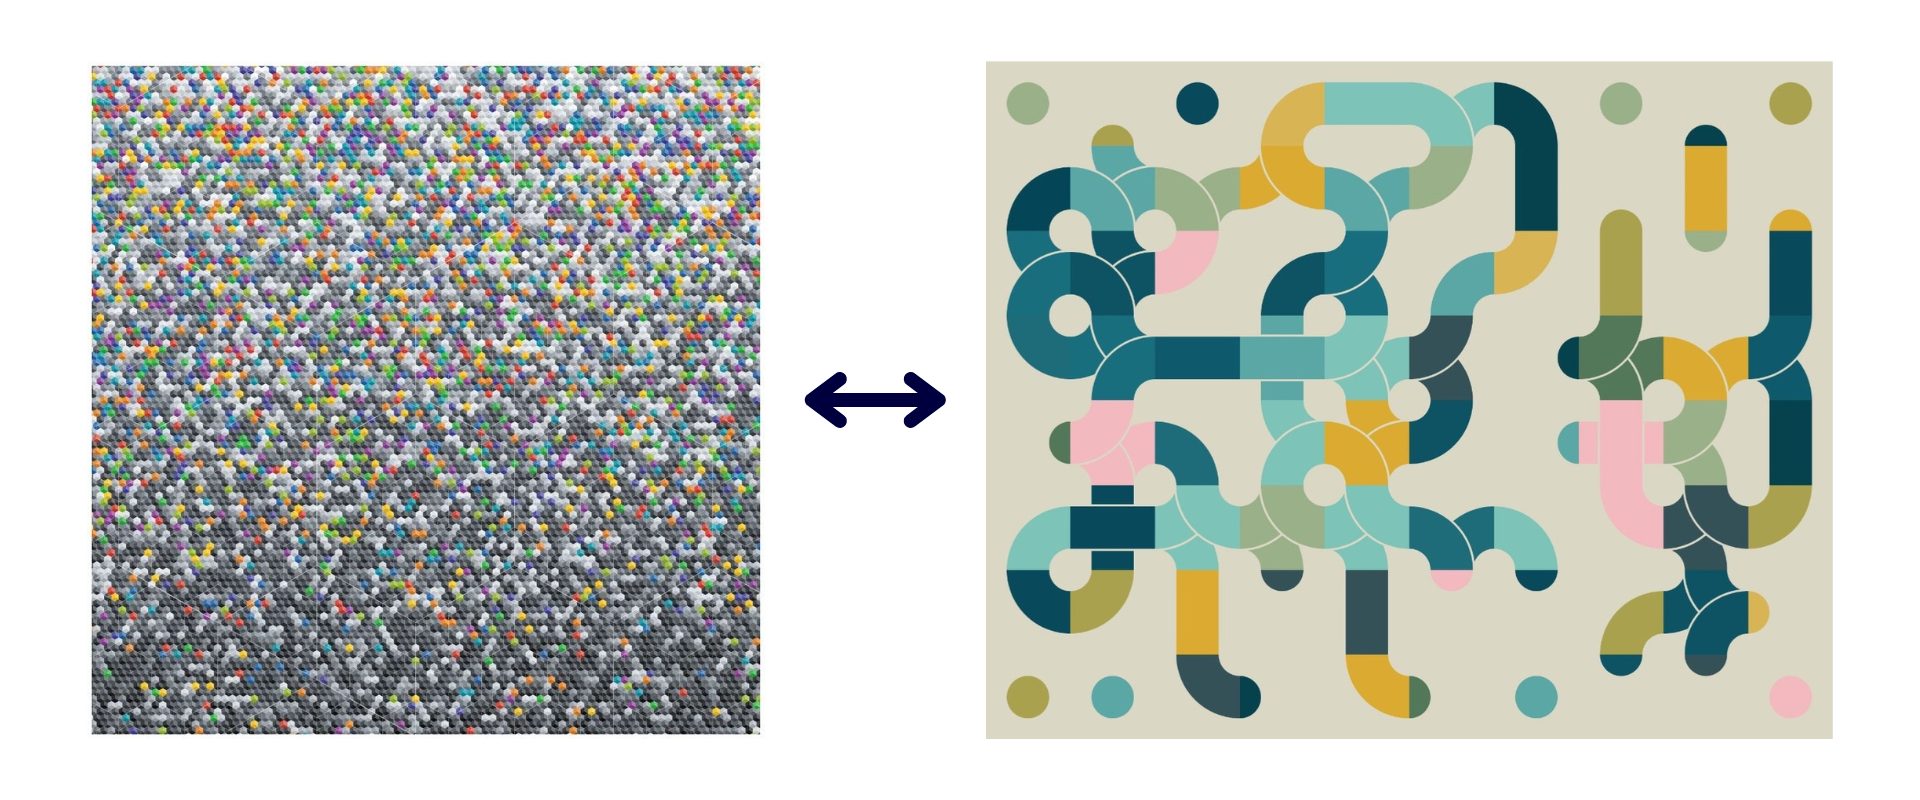 A diagram containing two images connected by double arrows. First image is composed of multi-colored dots. Second image is composed of intertwining multi-colored lines.